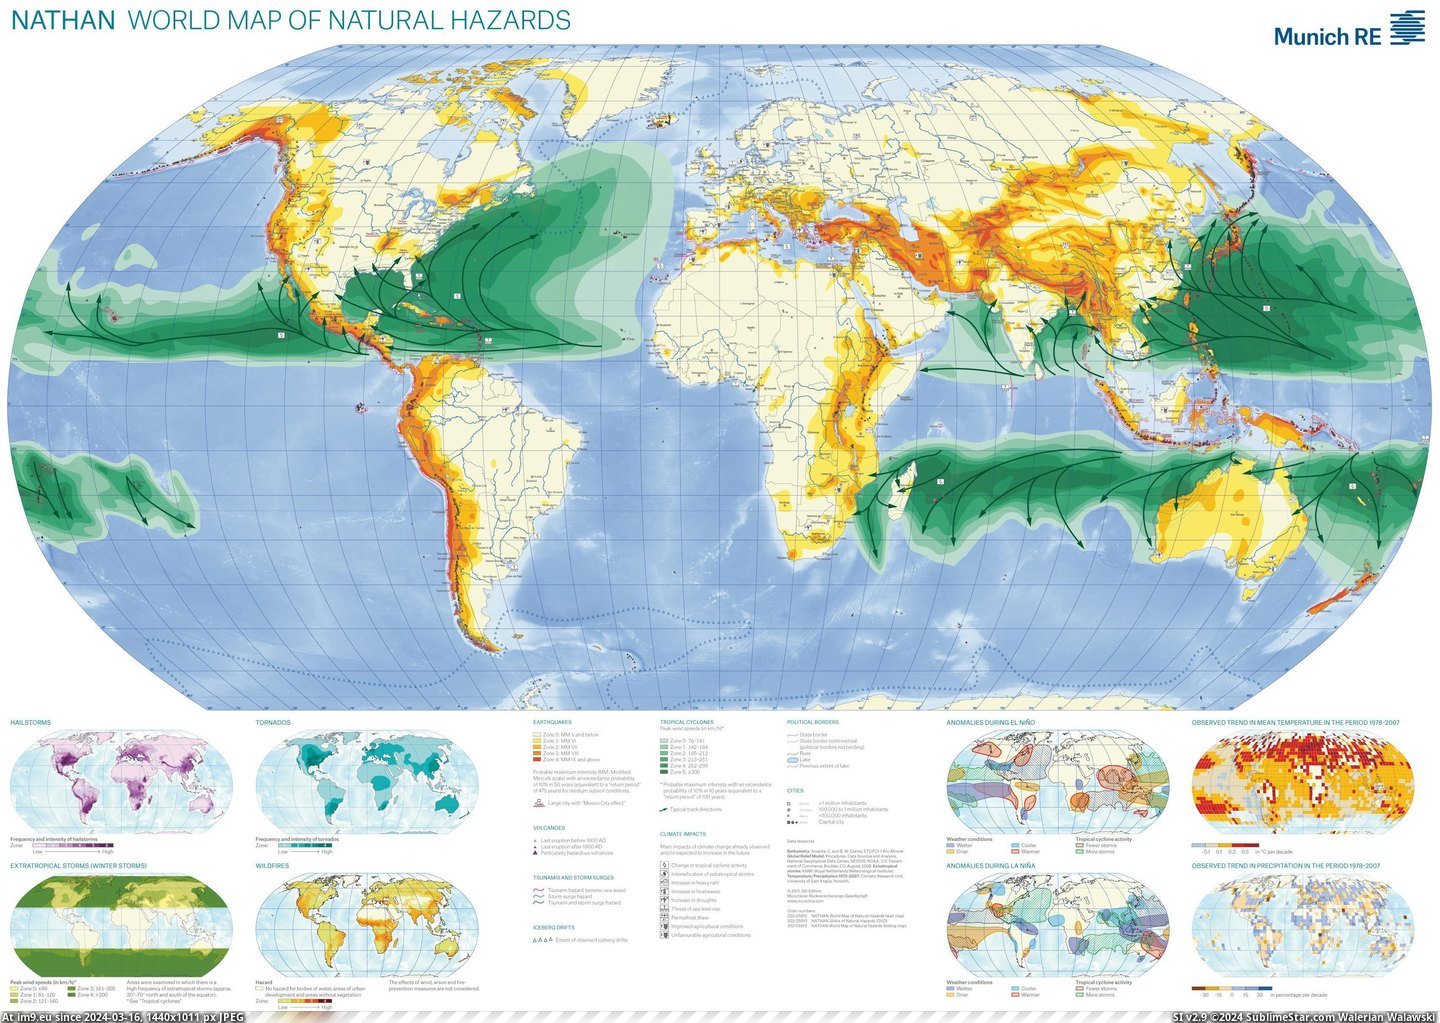 #World #Map #Natural #Cyclones #Tsunamis #Volcanoes #Earthquakes #Hazards [Dataisbeautiful] World Map of Natural Hazards (earthquakes, cyclones, volcanoes, tsunamis and more ... ) [X-Post MapPorn] Pic. (Bild von album My r/DATAISBEAUTIFUL favs))